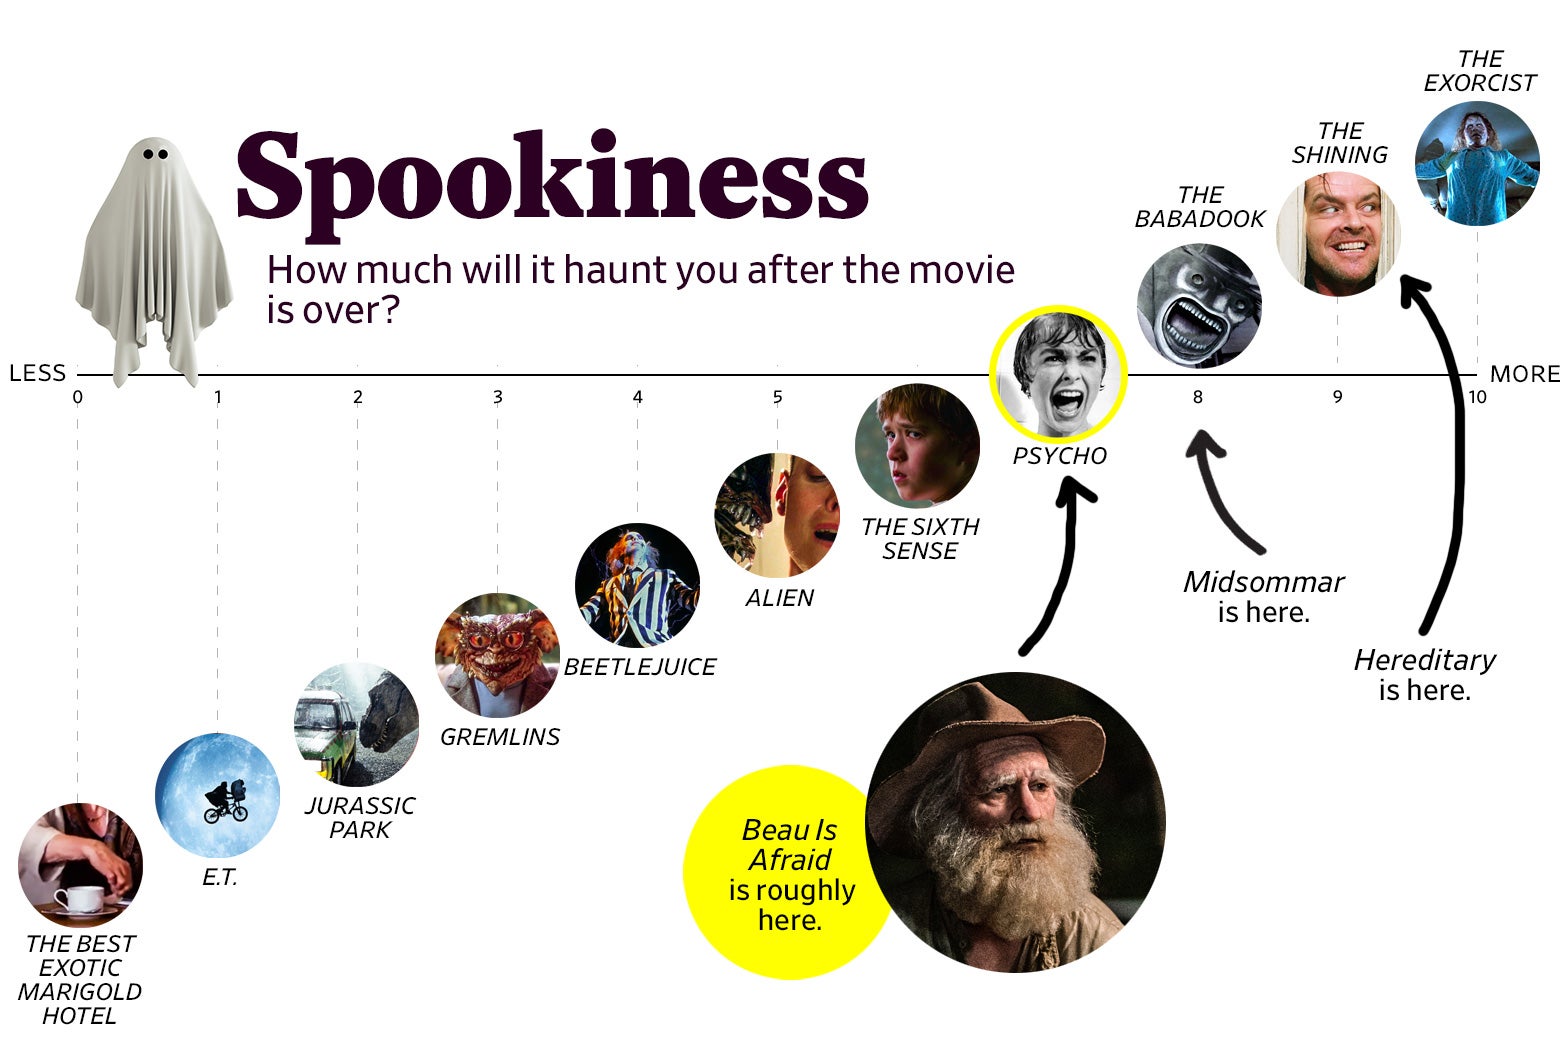 A chart titled “Spookiness: How much will it haunt you after the movie is over?” shows that Beau Is Afraid ranks a 7 in spookiness, roughly the same as Psycho, whereas Midsommar ranked an 8 in spookiness, roughly the same as The Babadook, and Hereditary ranked a 9, roughly the same as The Shining. The scale ranges from The Best Exotic Marigold Hotel (0) to The Exorcist (10).